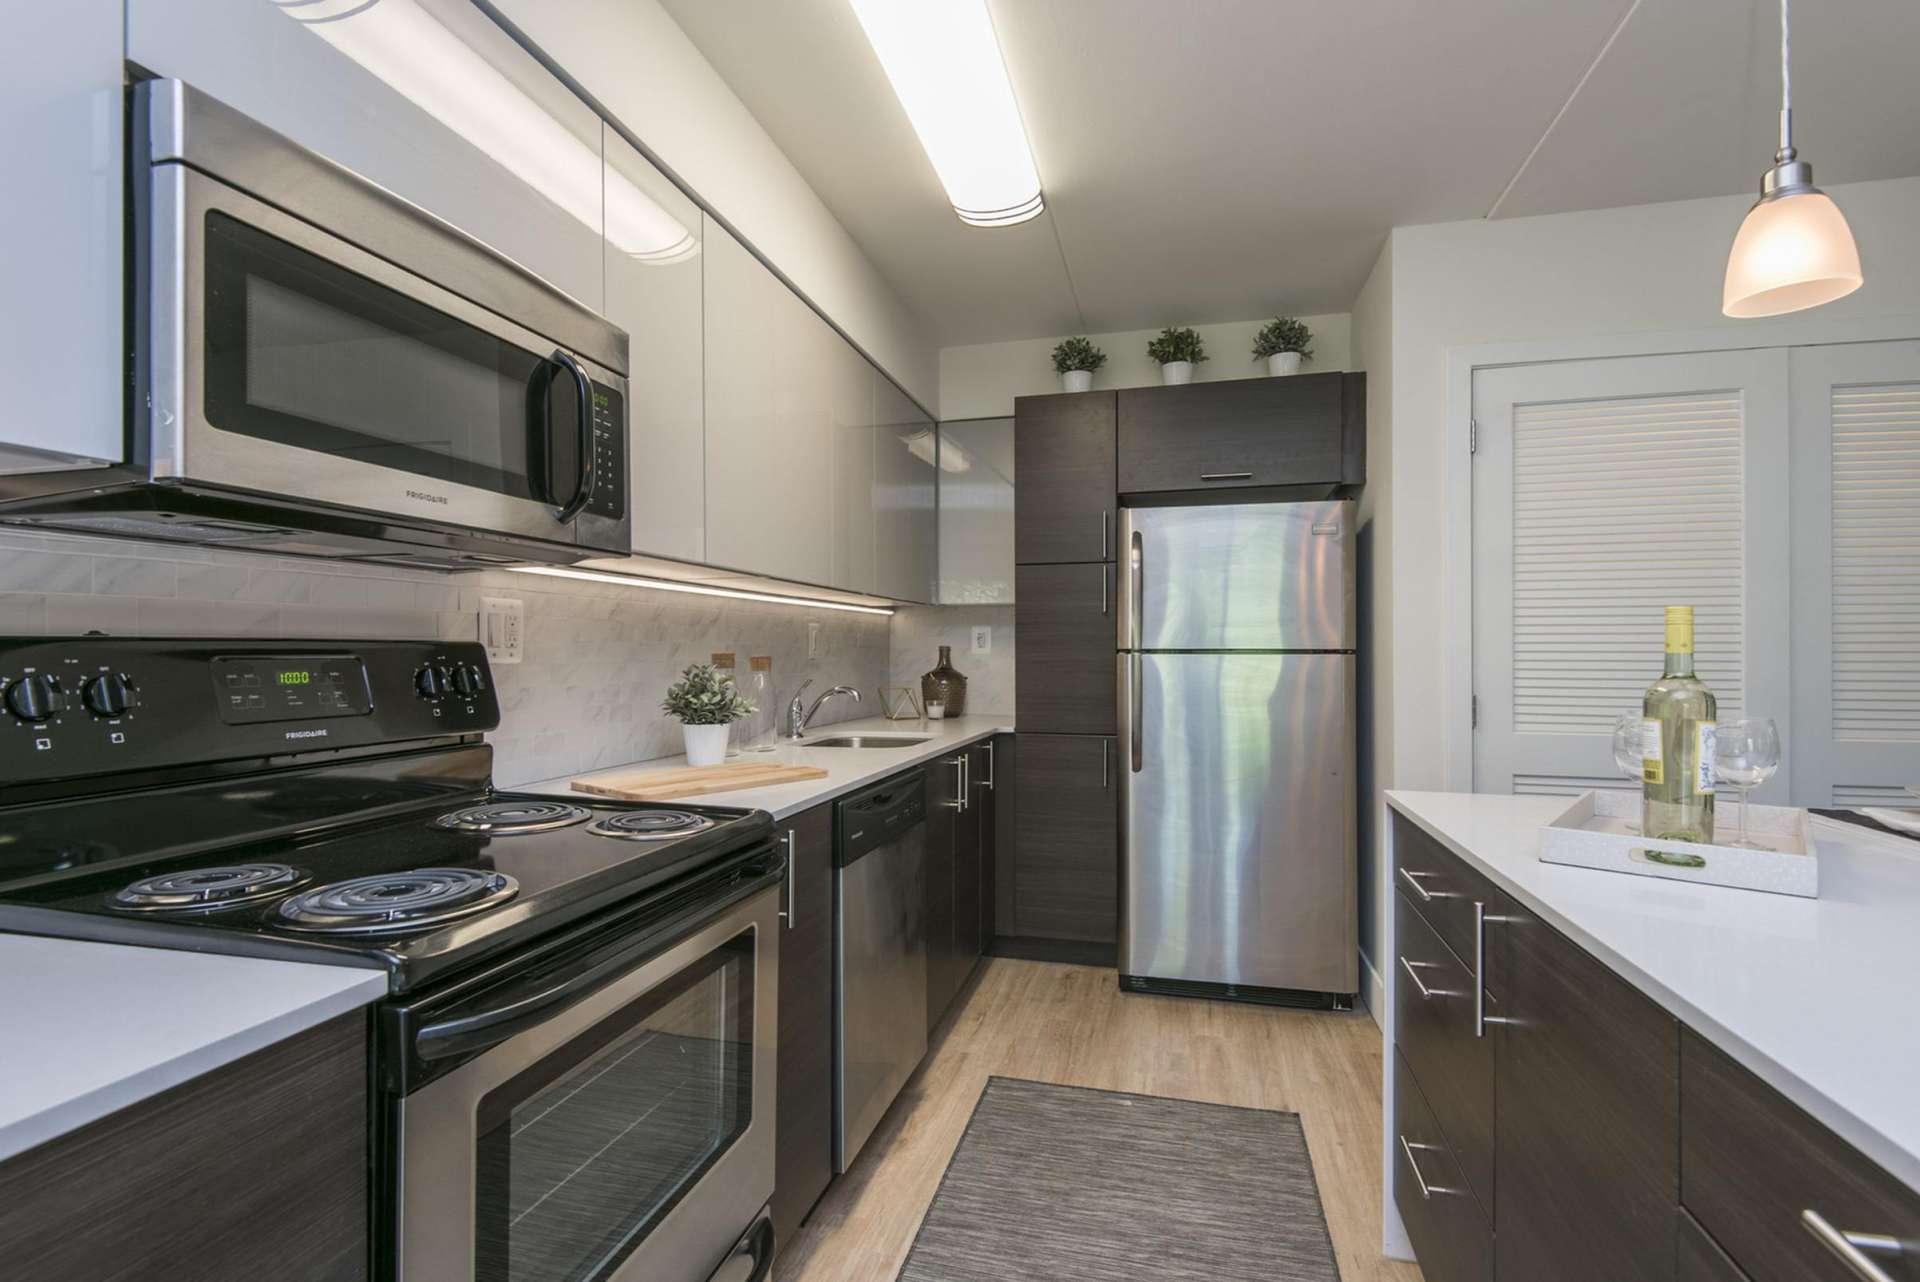 Kitchen with stainless steel appliances, hanging lights, and plenty of cabinet space at Gulph Mills Village Apartments.